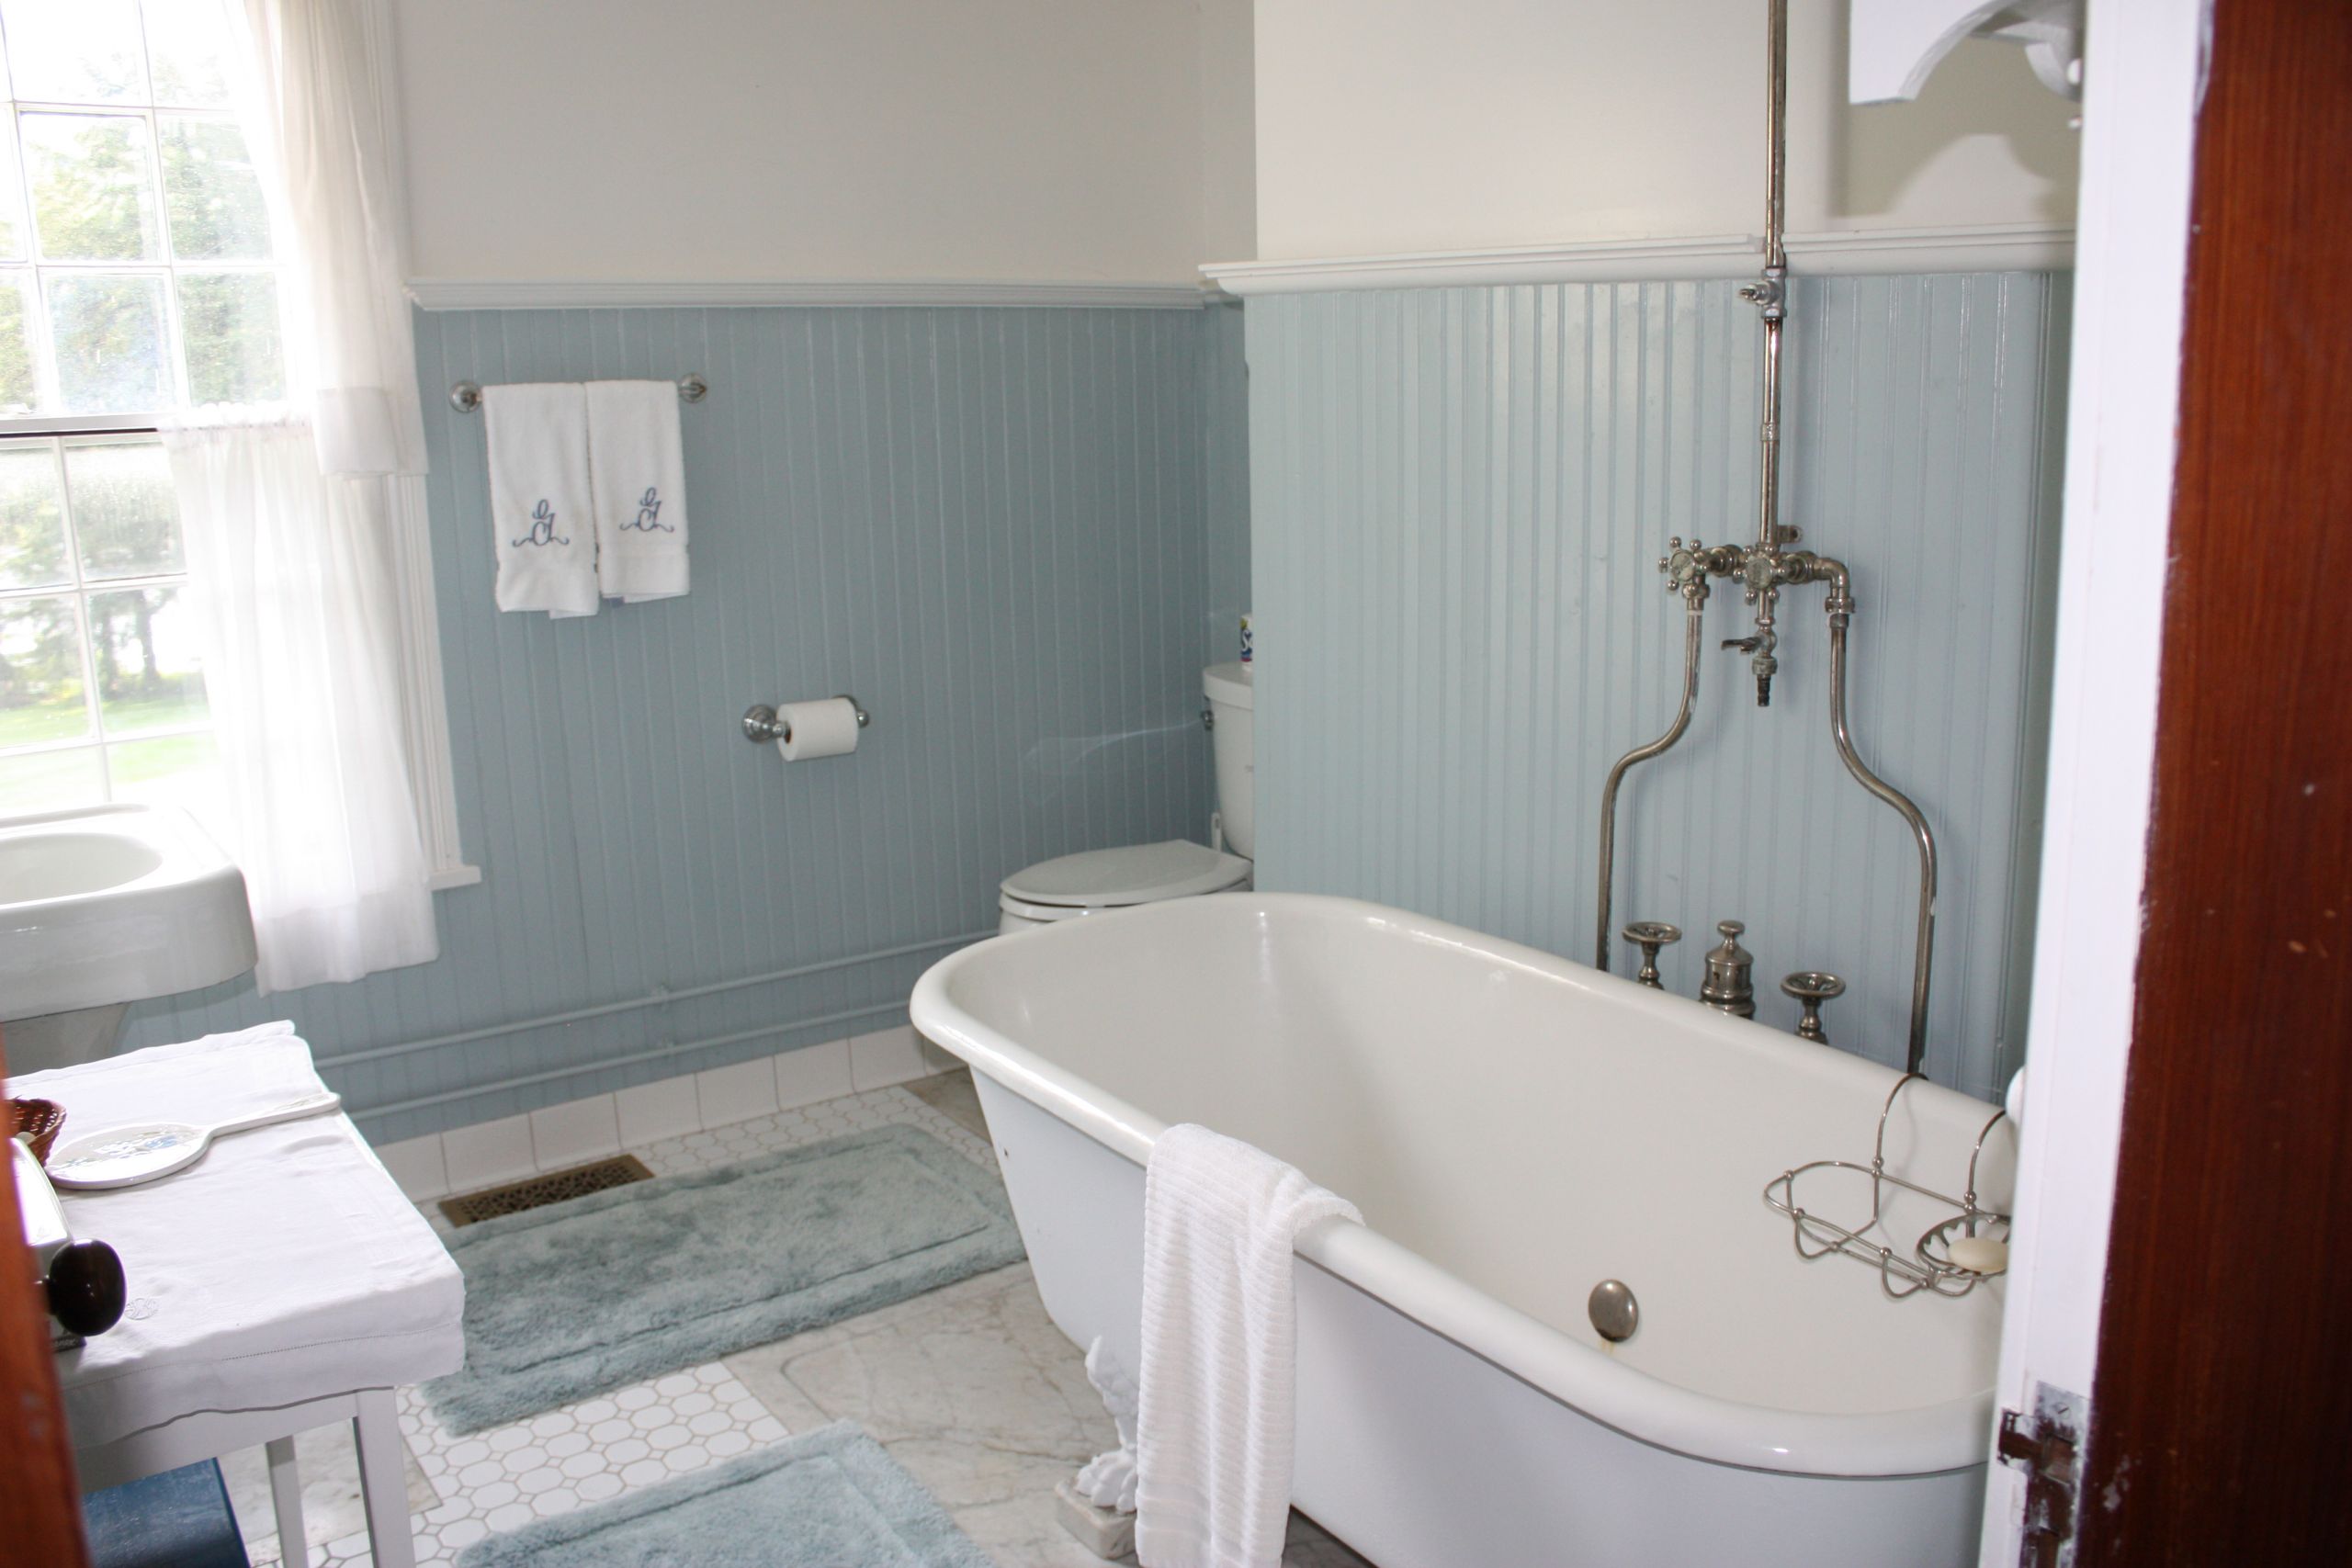 Covering Old Bathroom Tiles
 36 nice ideas and pictures of vintage bathroom tile design